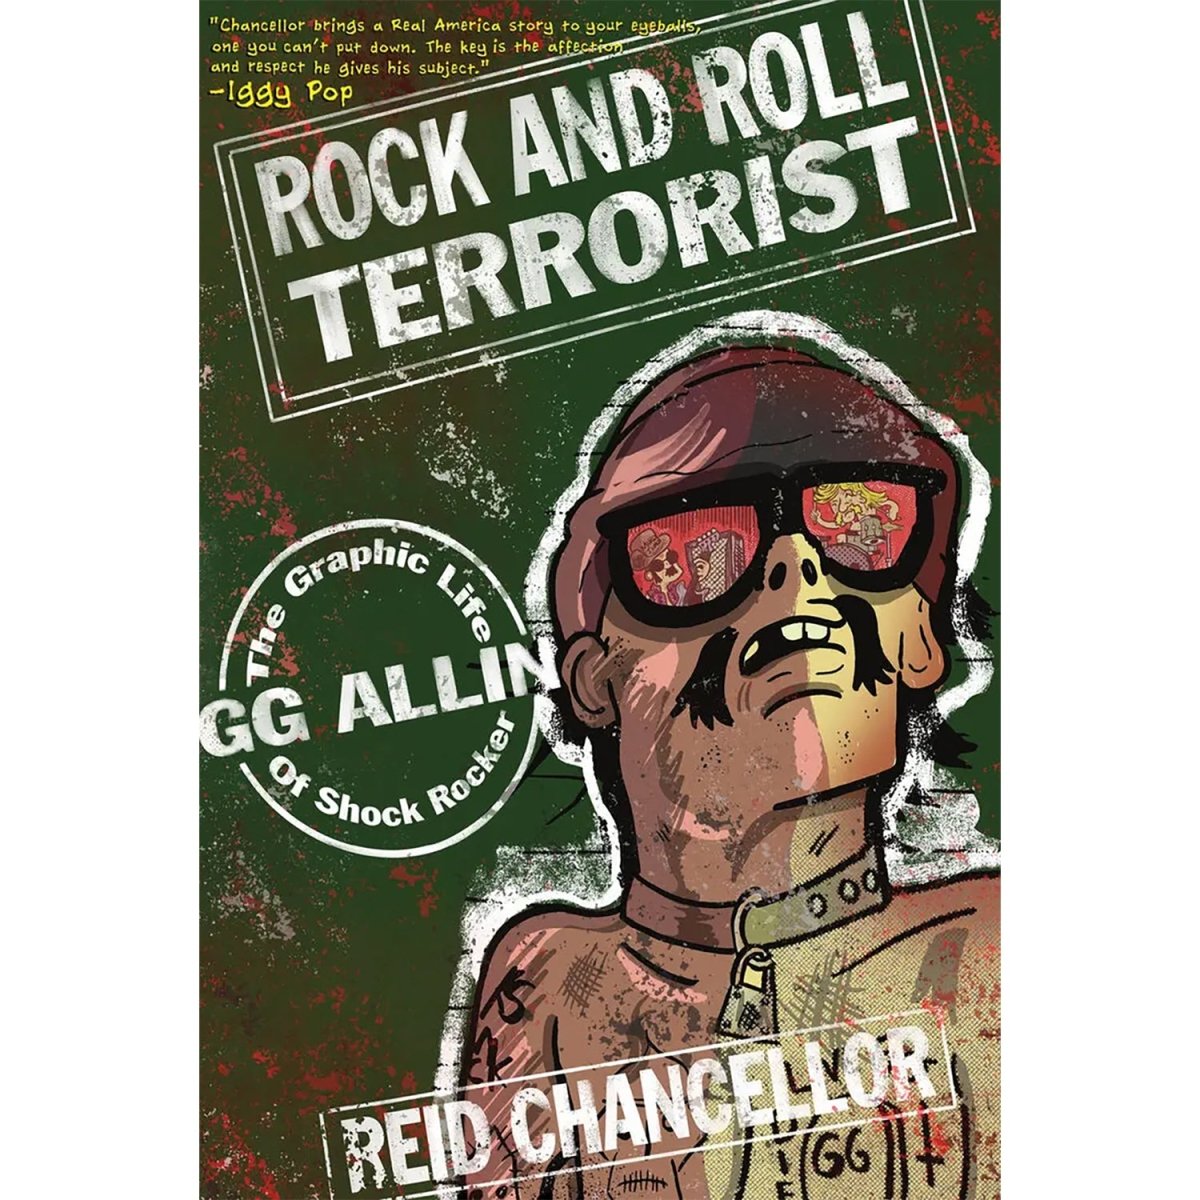 Too Fast | Rock and Roll Terrorist: The Graphic Life of GG Allin